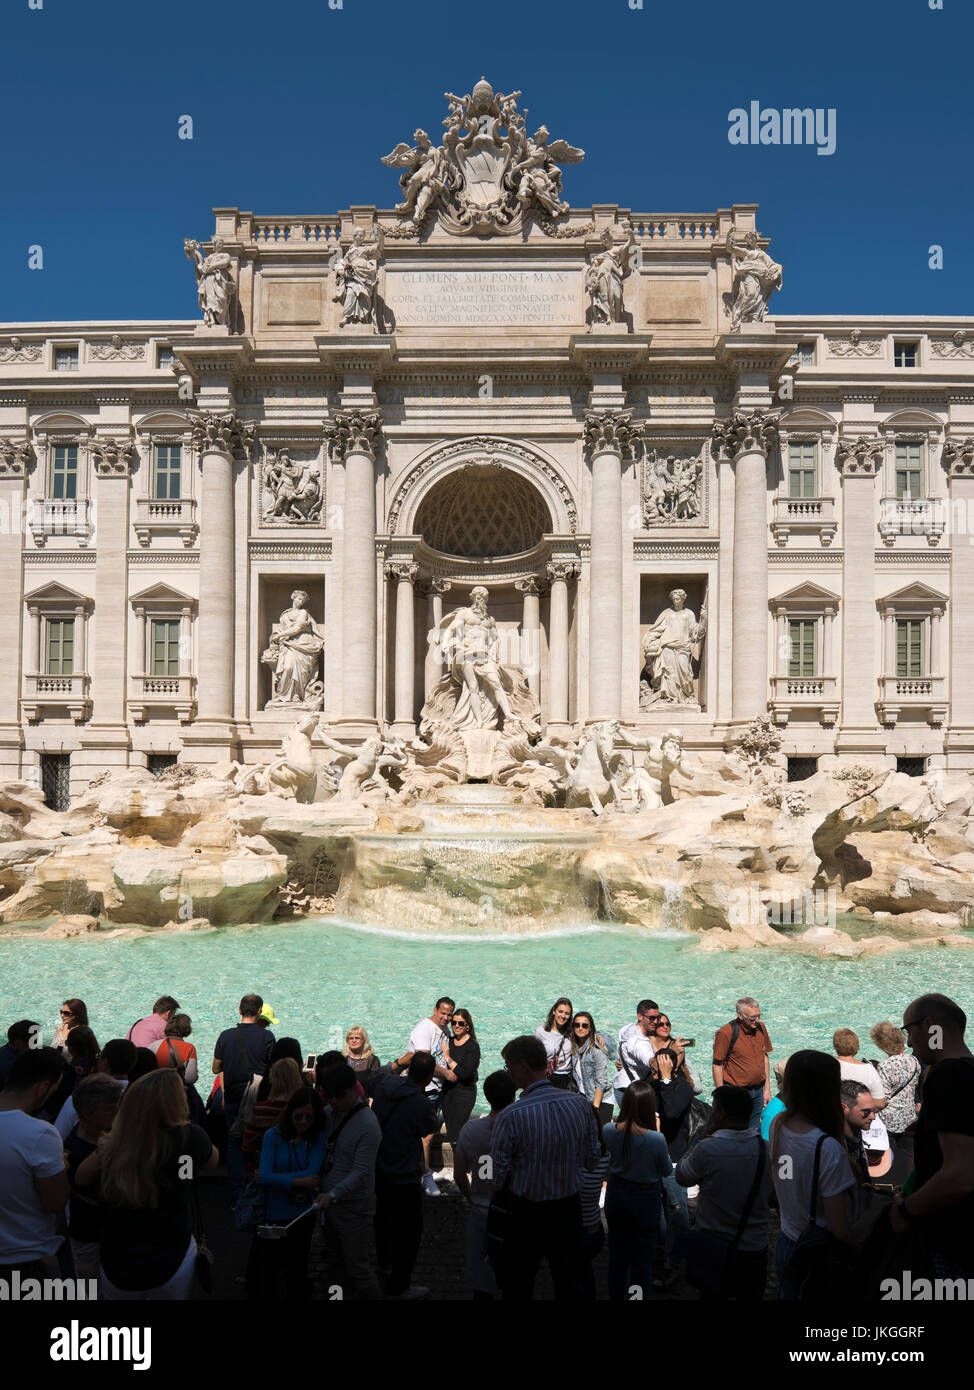 Vertical view of tourists taking photos around the Trevi Fountain in Rome. Stock Photo